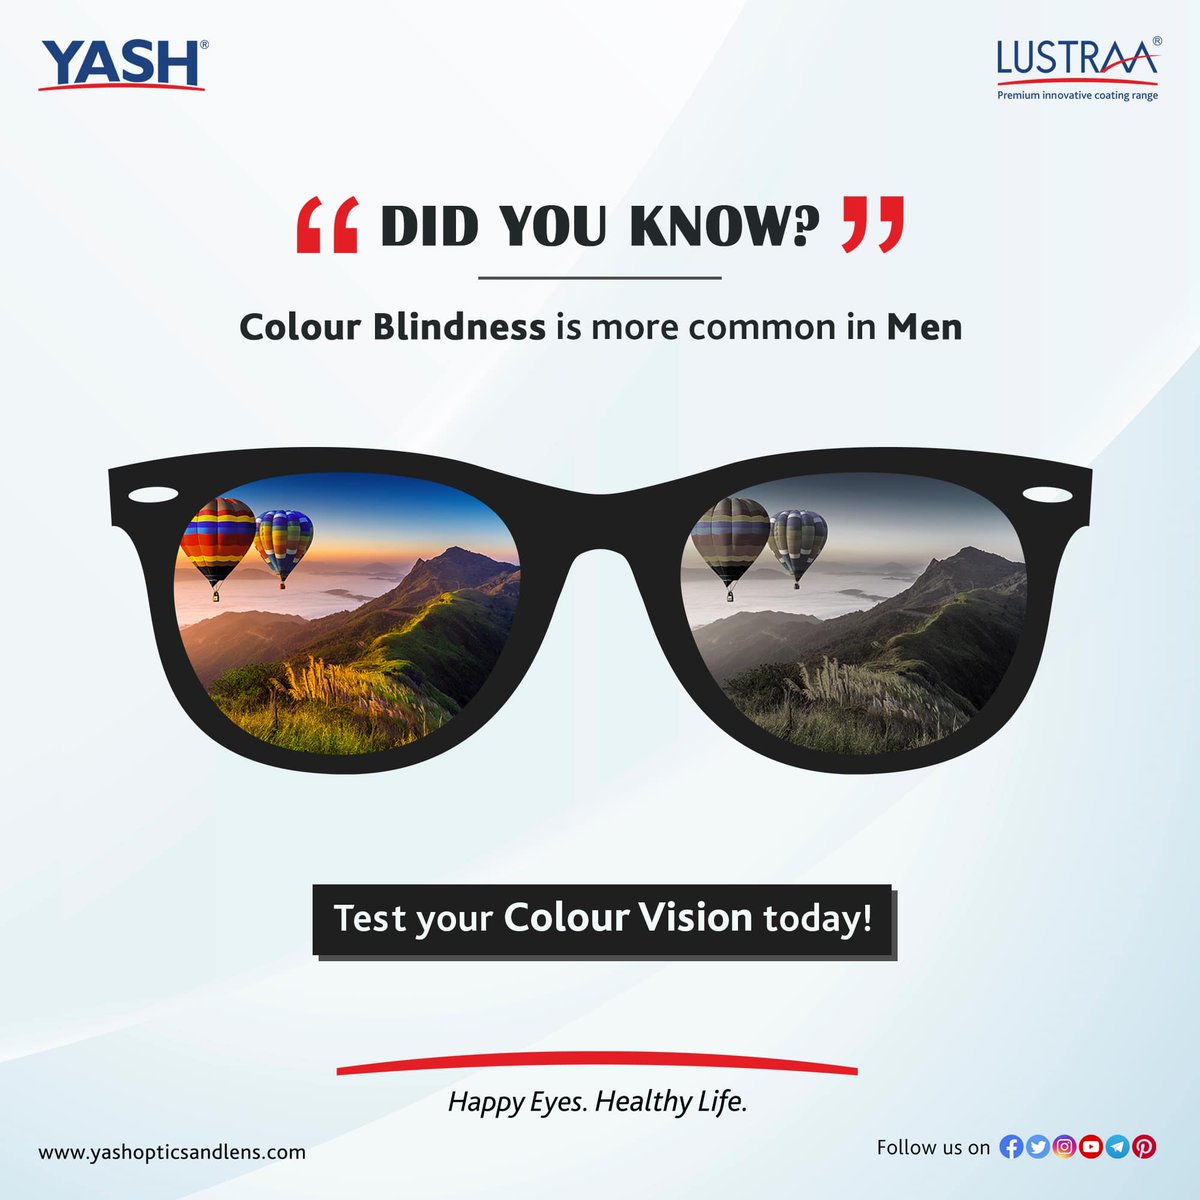 It’s estimated that there are 300 million #colourblind people in the world!
#DidYouKnow #ColourBlindness #ColourBlind #ColourVision #EyeTest #Eyes #EyeFacts #Awareness #EyeAwareness #EyeCare #EyeSight #EyeCareSpecialists #EyeProblems #LustraaCoatings #YashOpticsandLens #HappyEye